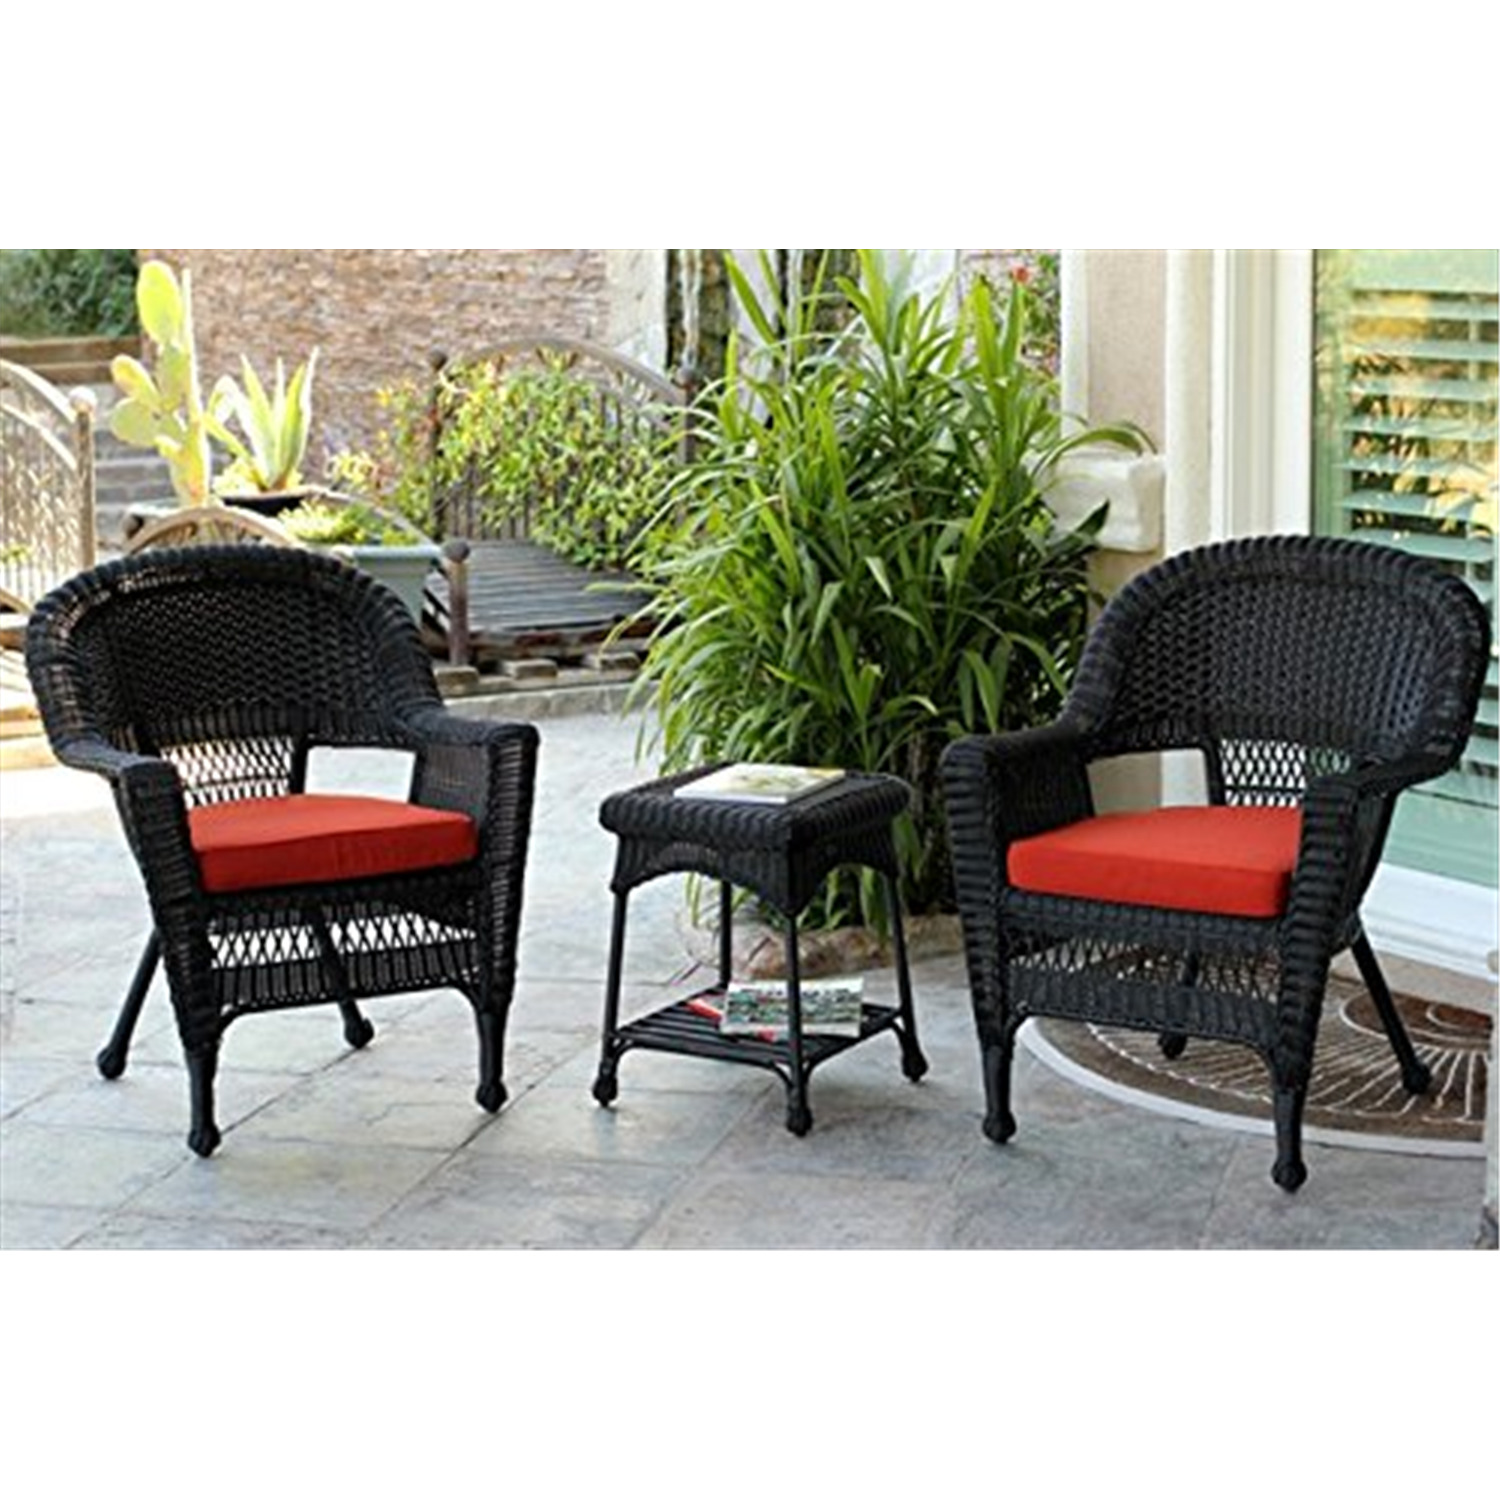 3pc Black Wicker Chair and End Table Set with Red Orange Cushion - image 1 of 1